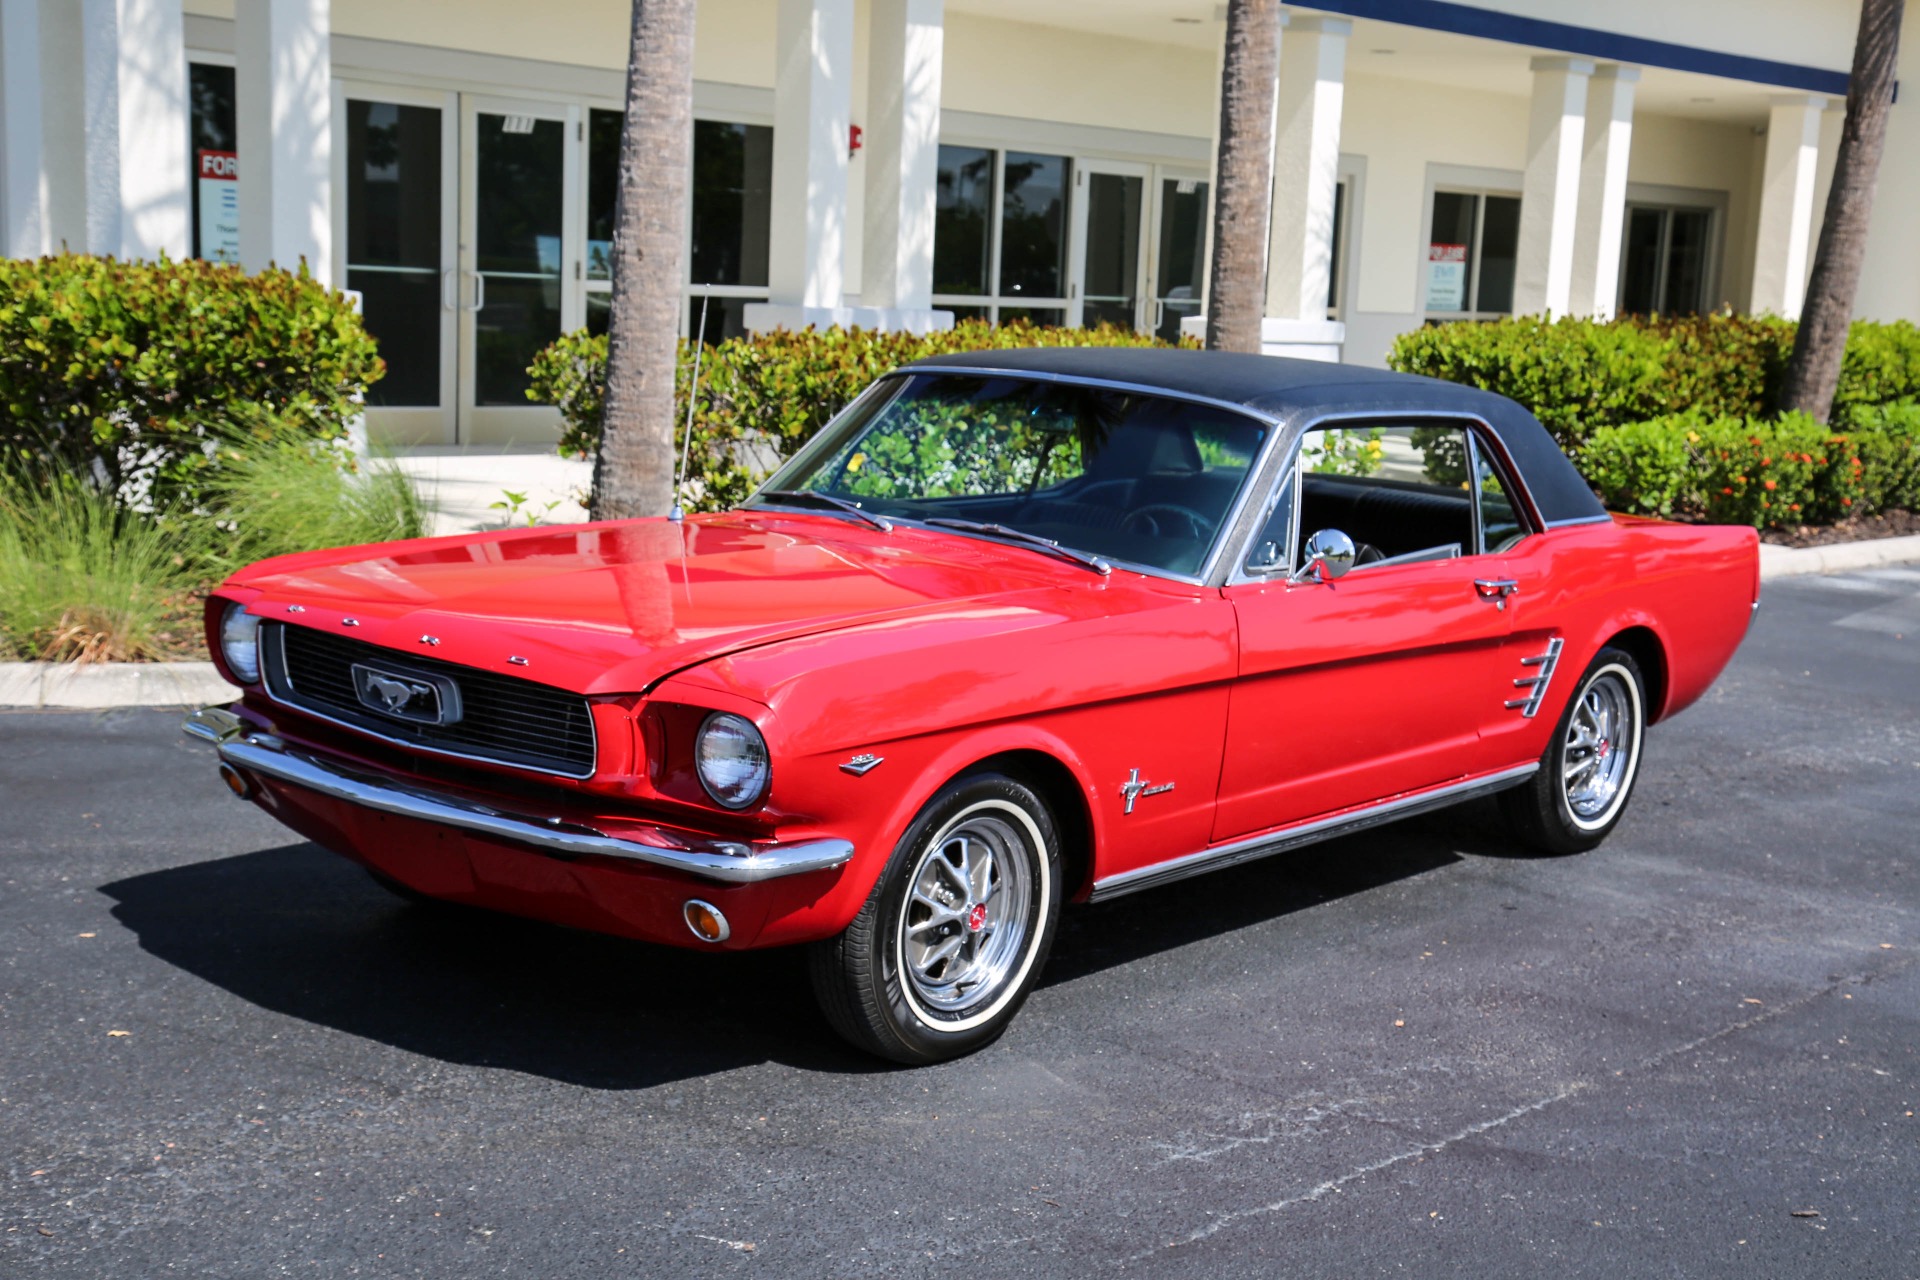 Used 1966 Ford Mustang C Code V8 Manual for sale Sold at Muscle Cars for Sale Inc. in Fort Myers FL 33912 6